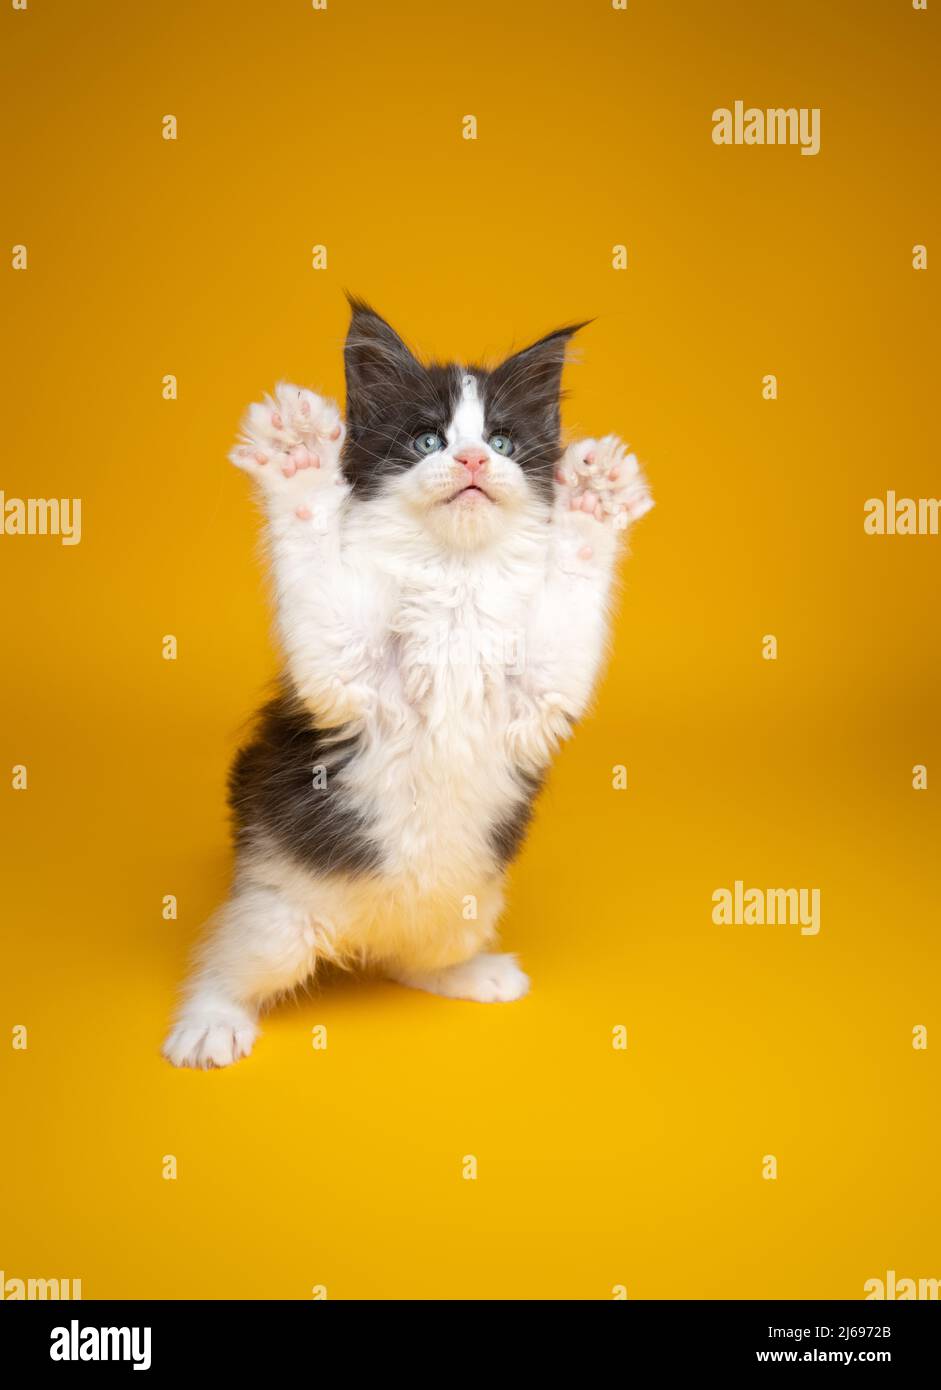 cute kitten playing rearing up standing on hind legs on yellow background with copy space Stock Photo